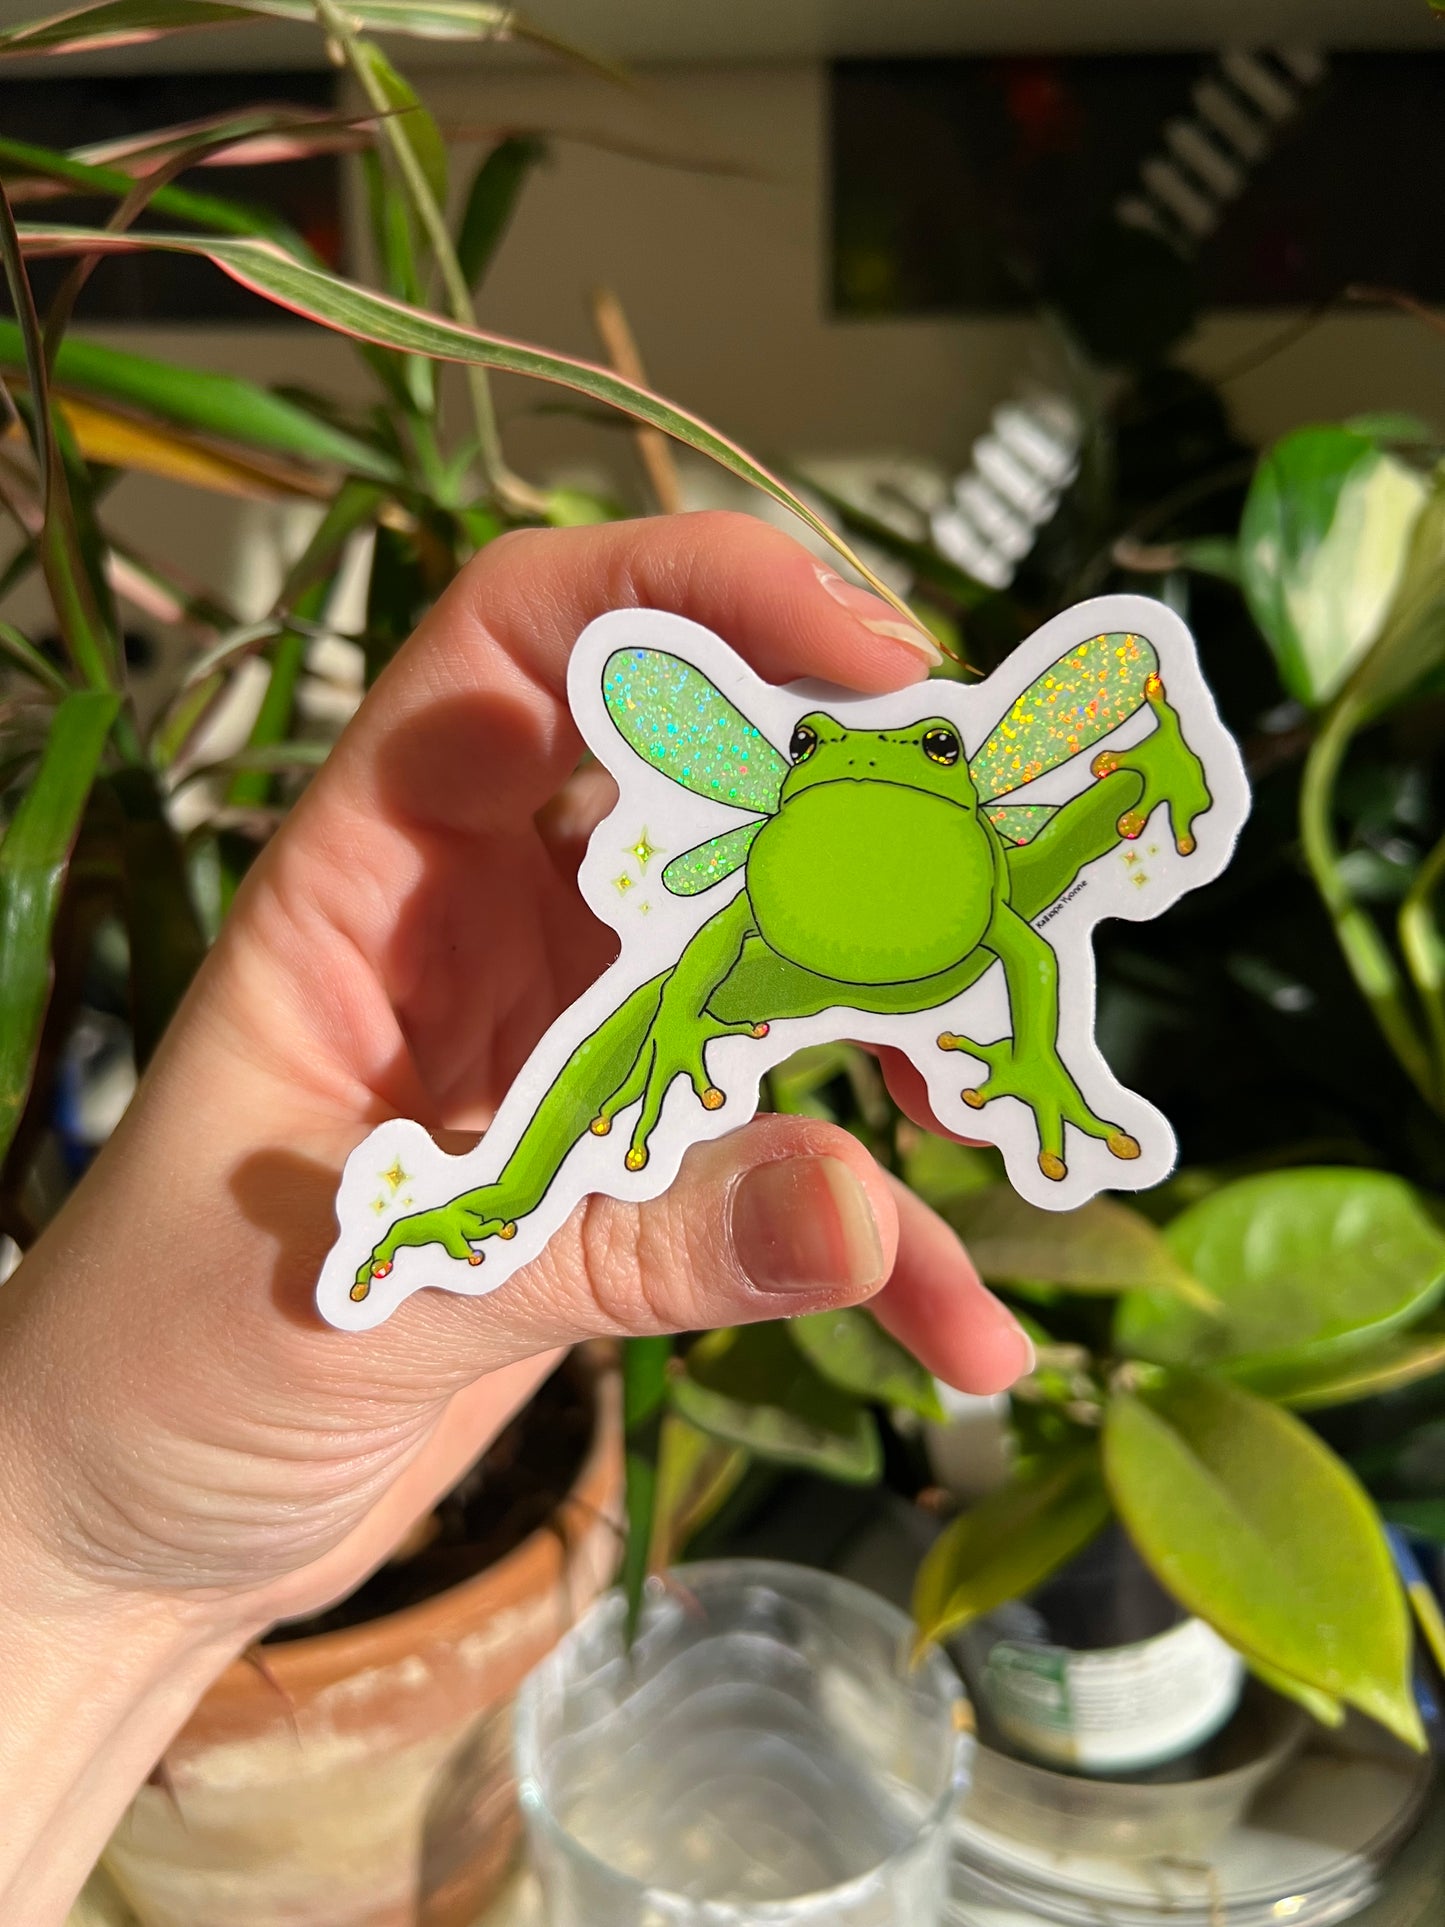 Limited Edition “Croaking Fairy” Holographic Vinyl Sticker